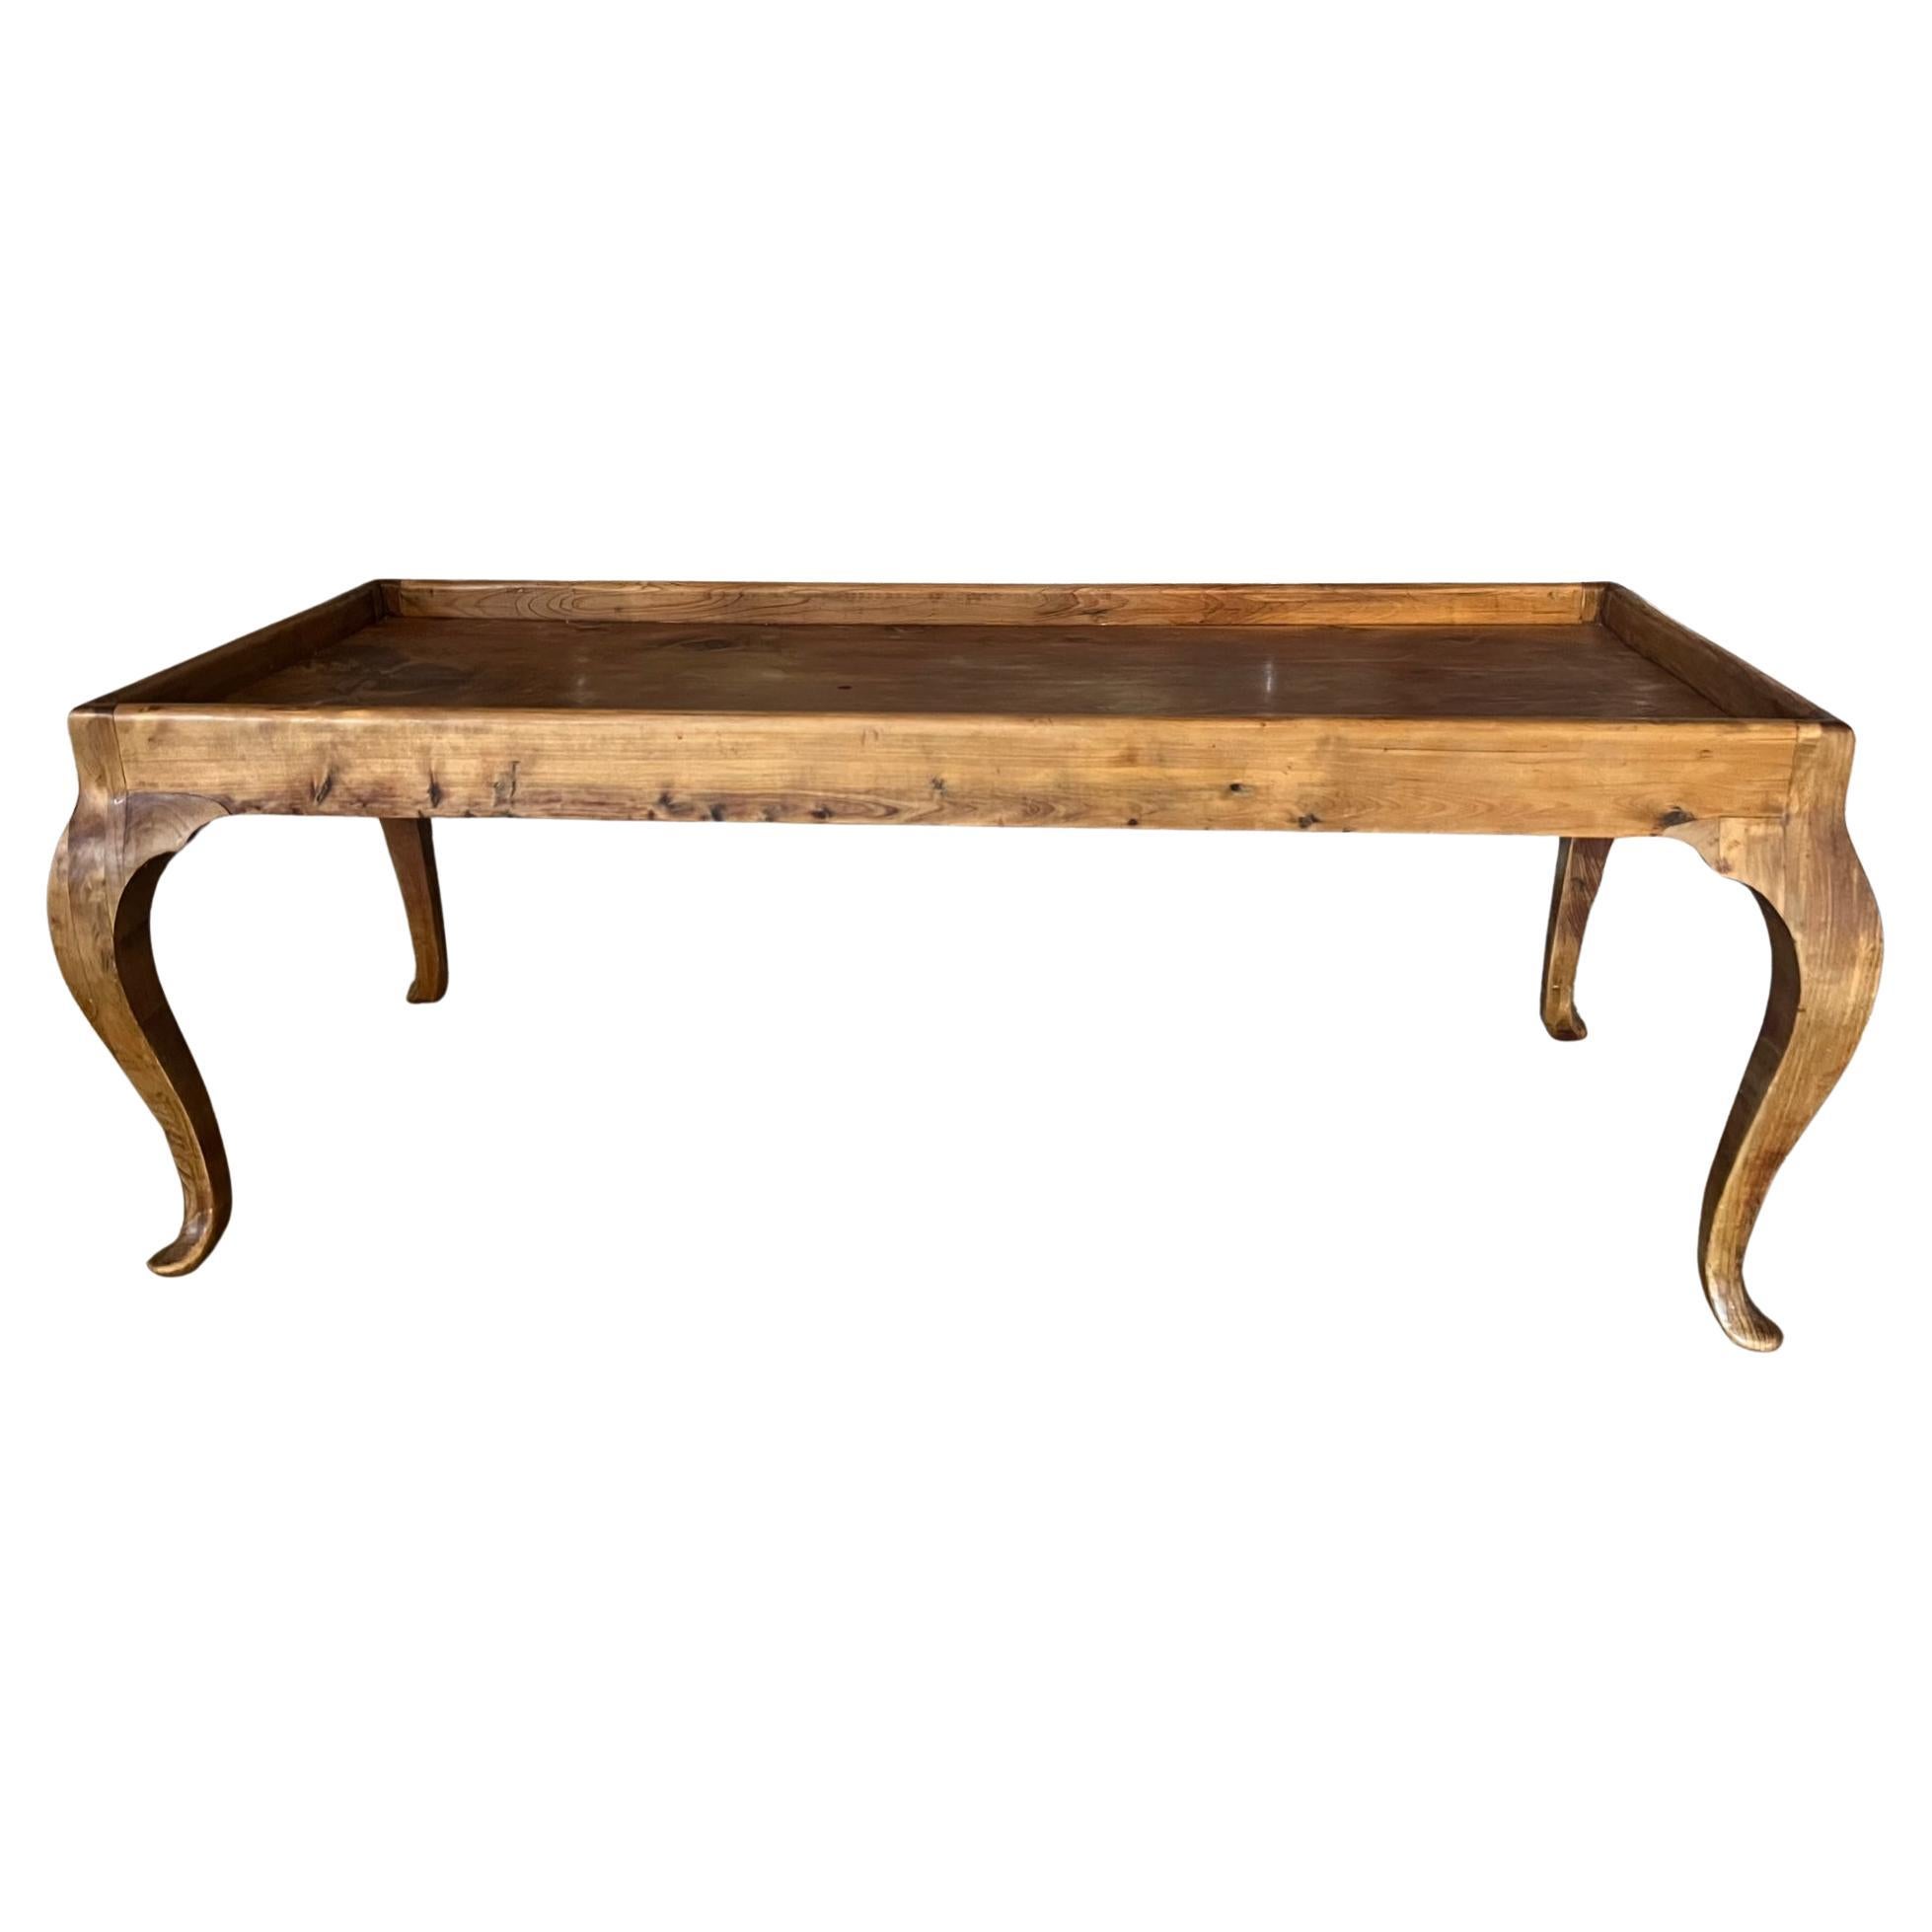 Light weight hand crafted coffee table made by a home furniture maker. The table with has cabriolet legs and rimmed top.

Table top measures 36.25 x 14.25